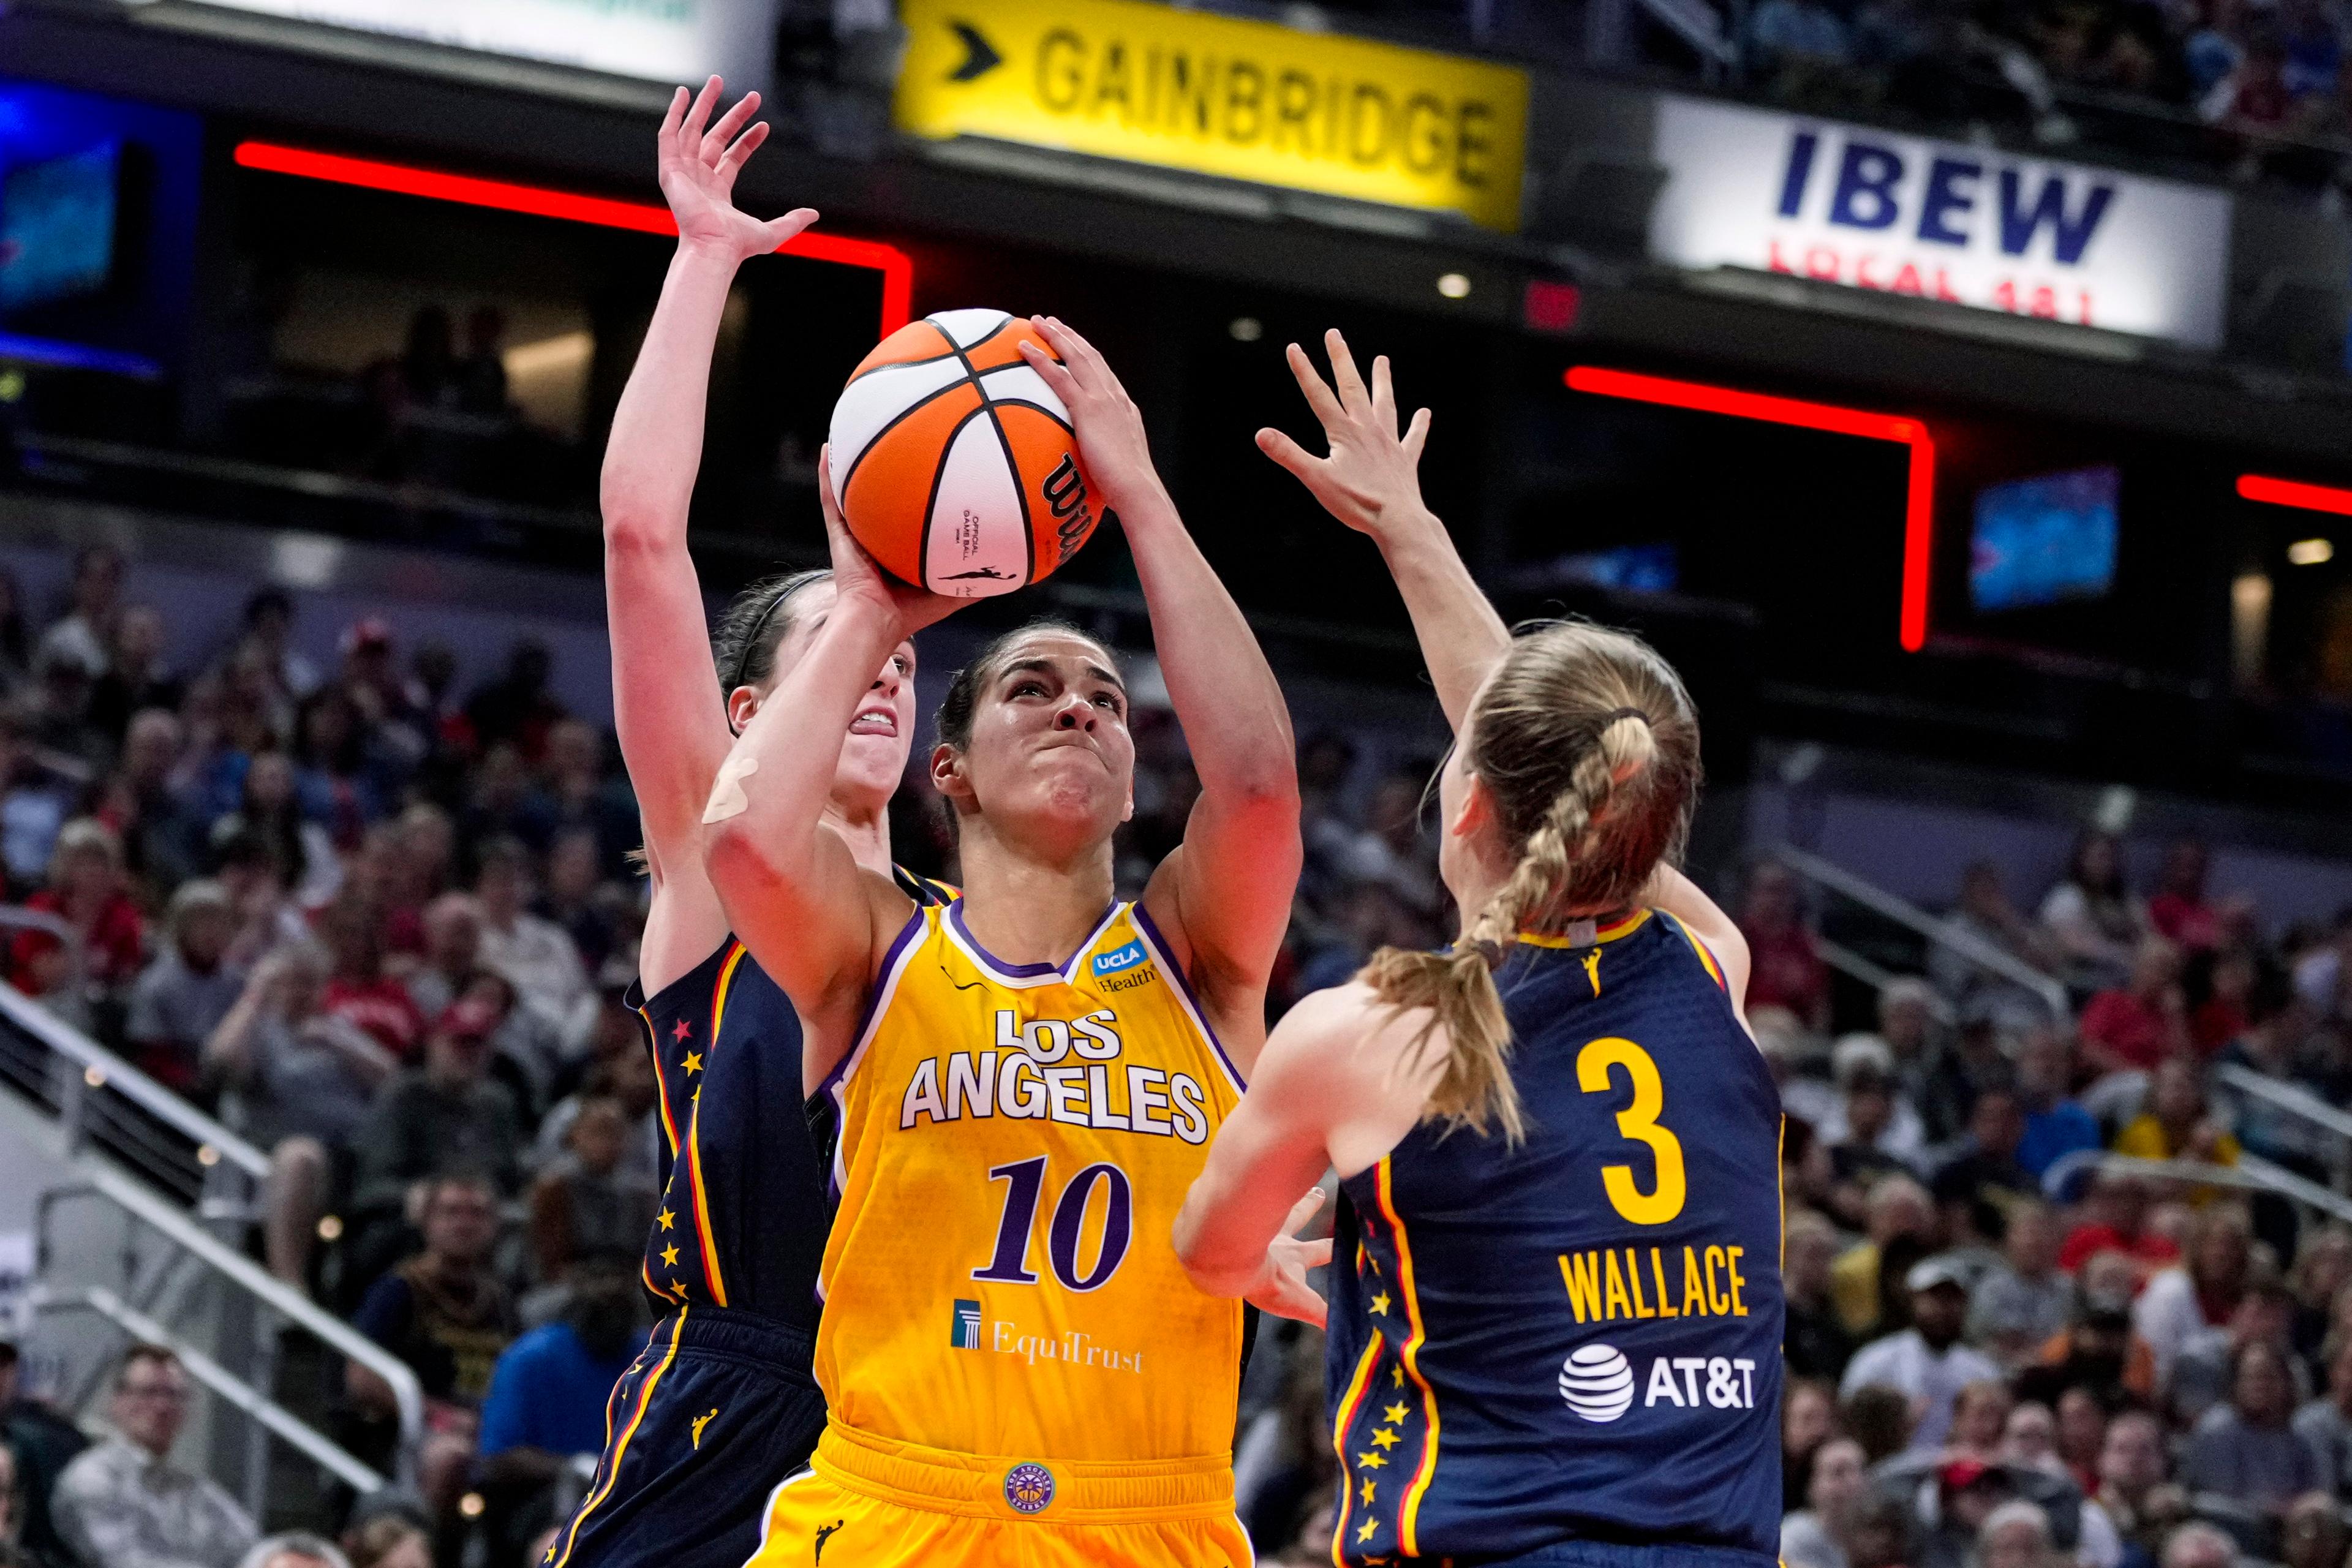 Sparks Suffer Fifth Consecutive Loss in First Game Without Injured Rookie Brink